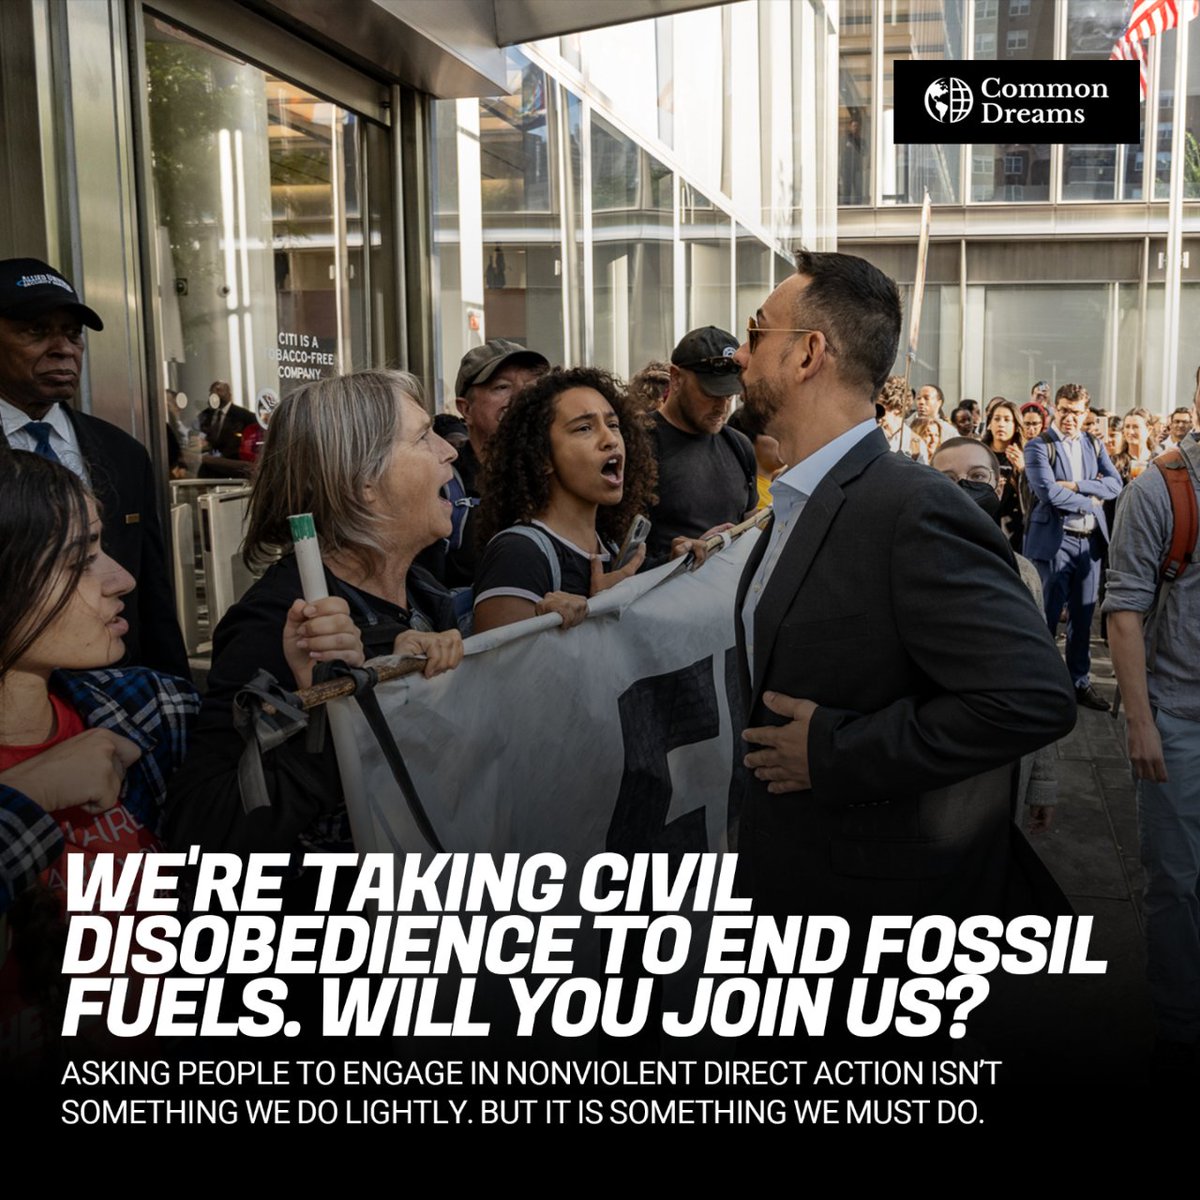 'This summer, we are asking thousands of people to join us in engaging in nonviolent civil disobedience.'
 
#SummerofHeat #EndFossilFuels

🔗commondreams.org/opinion/we-re-…